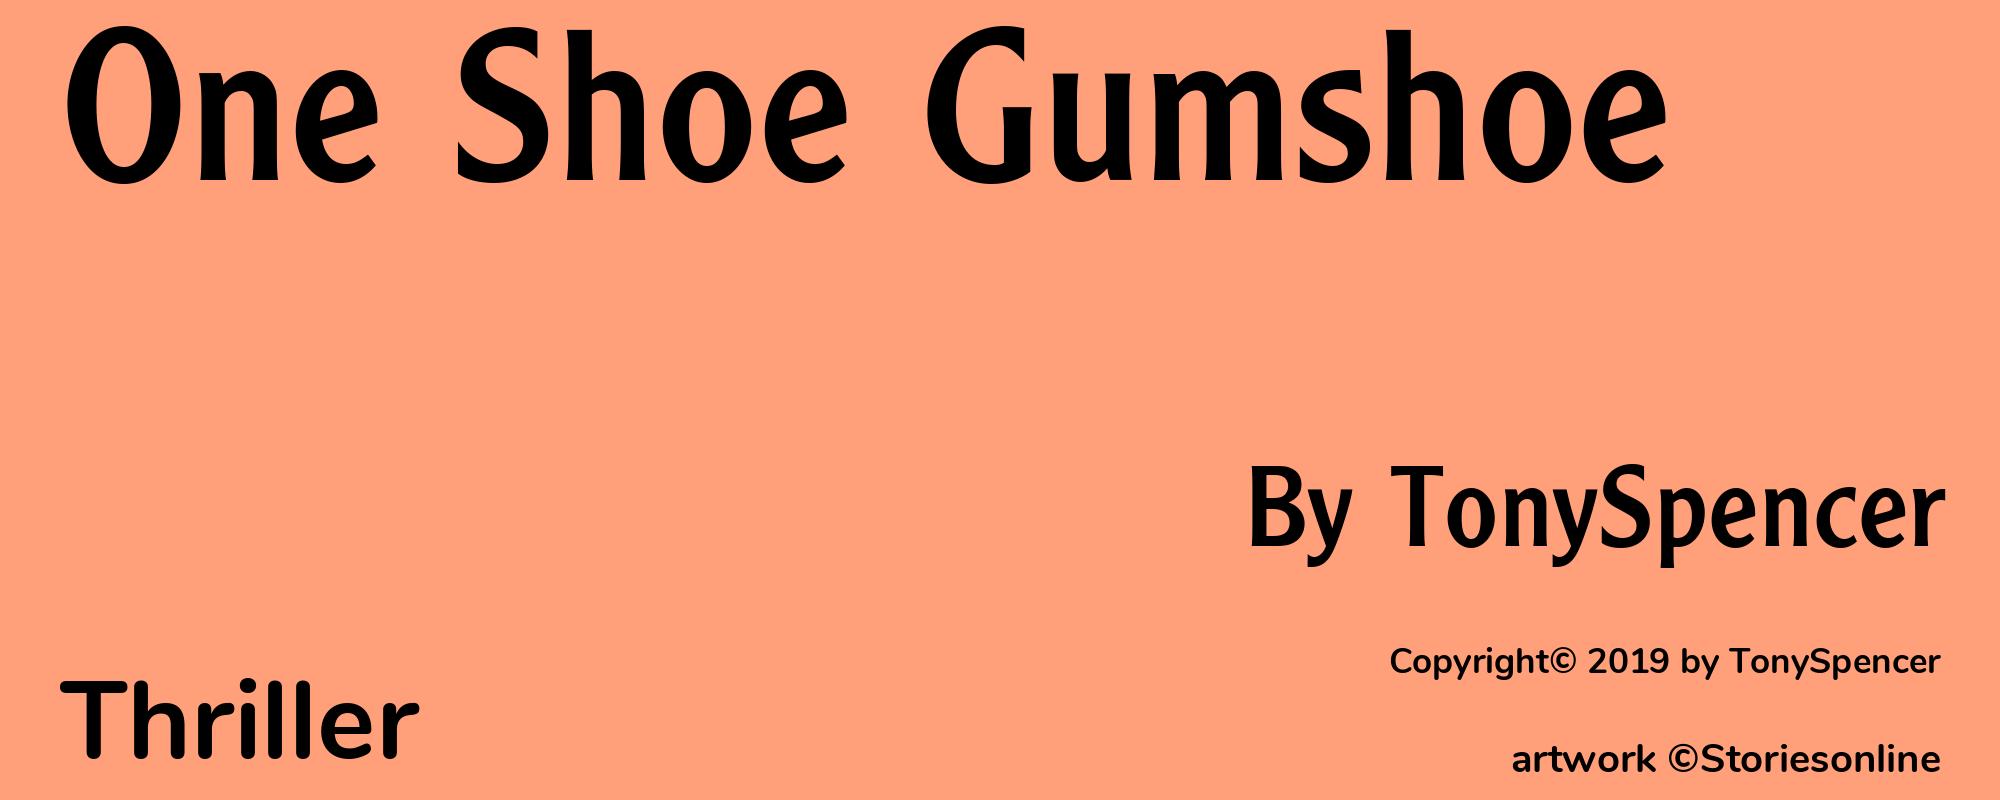 One Shoe Gumshoe - Cover